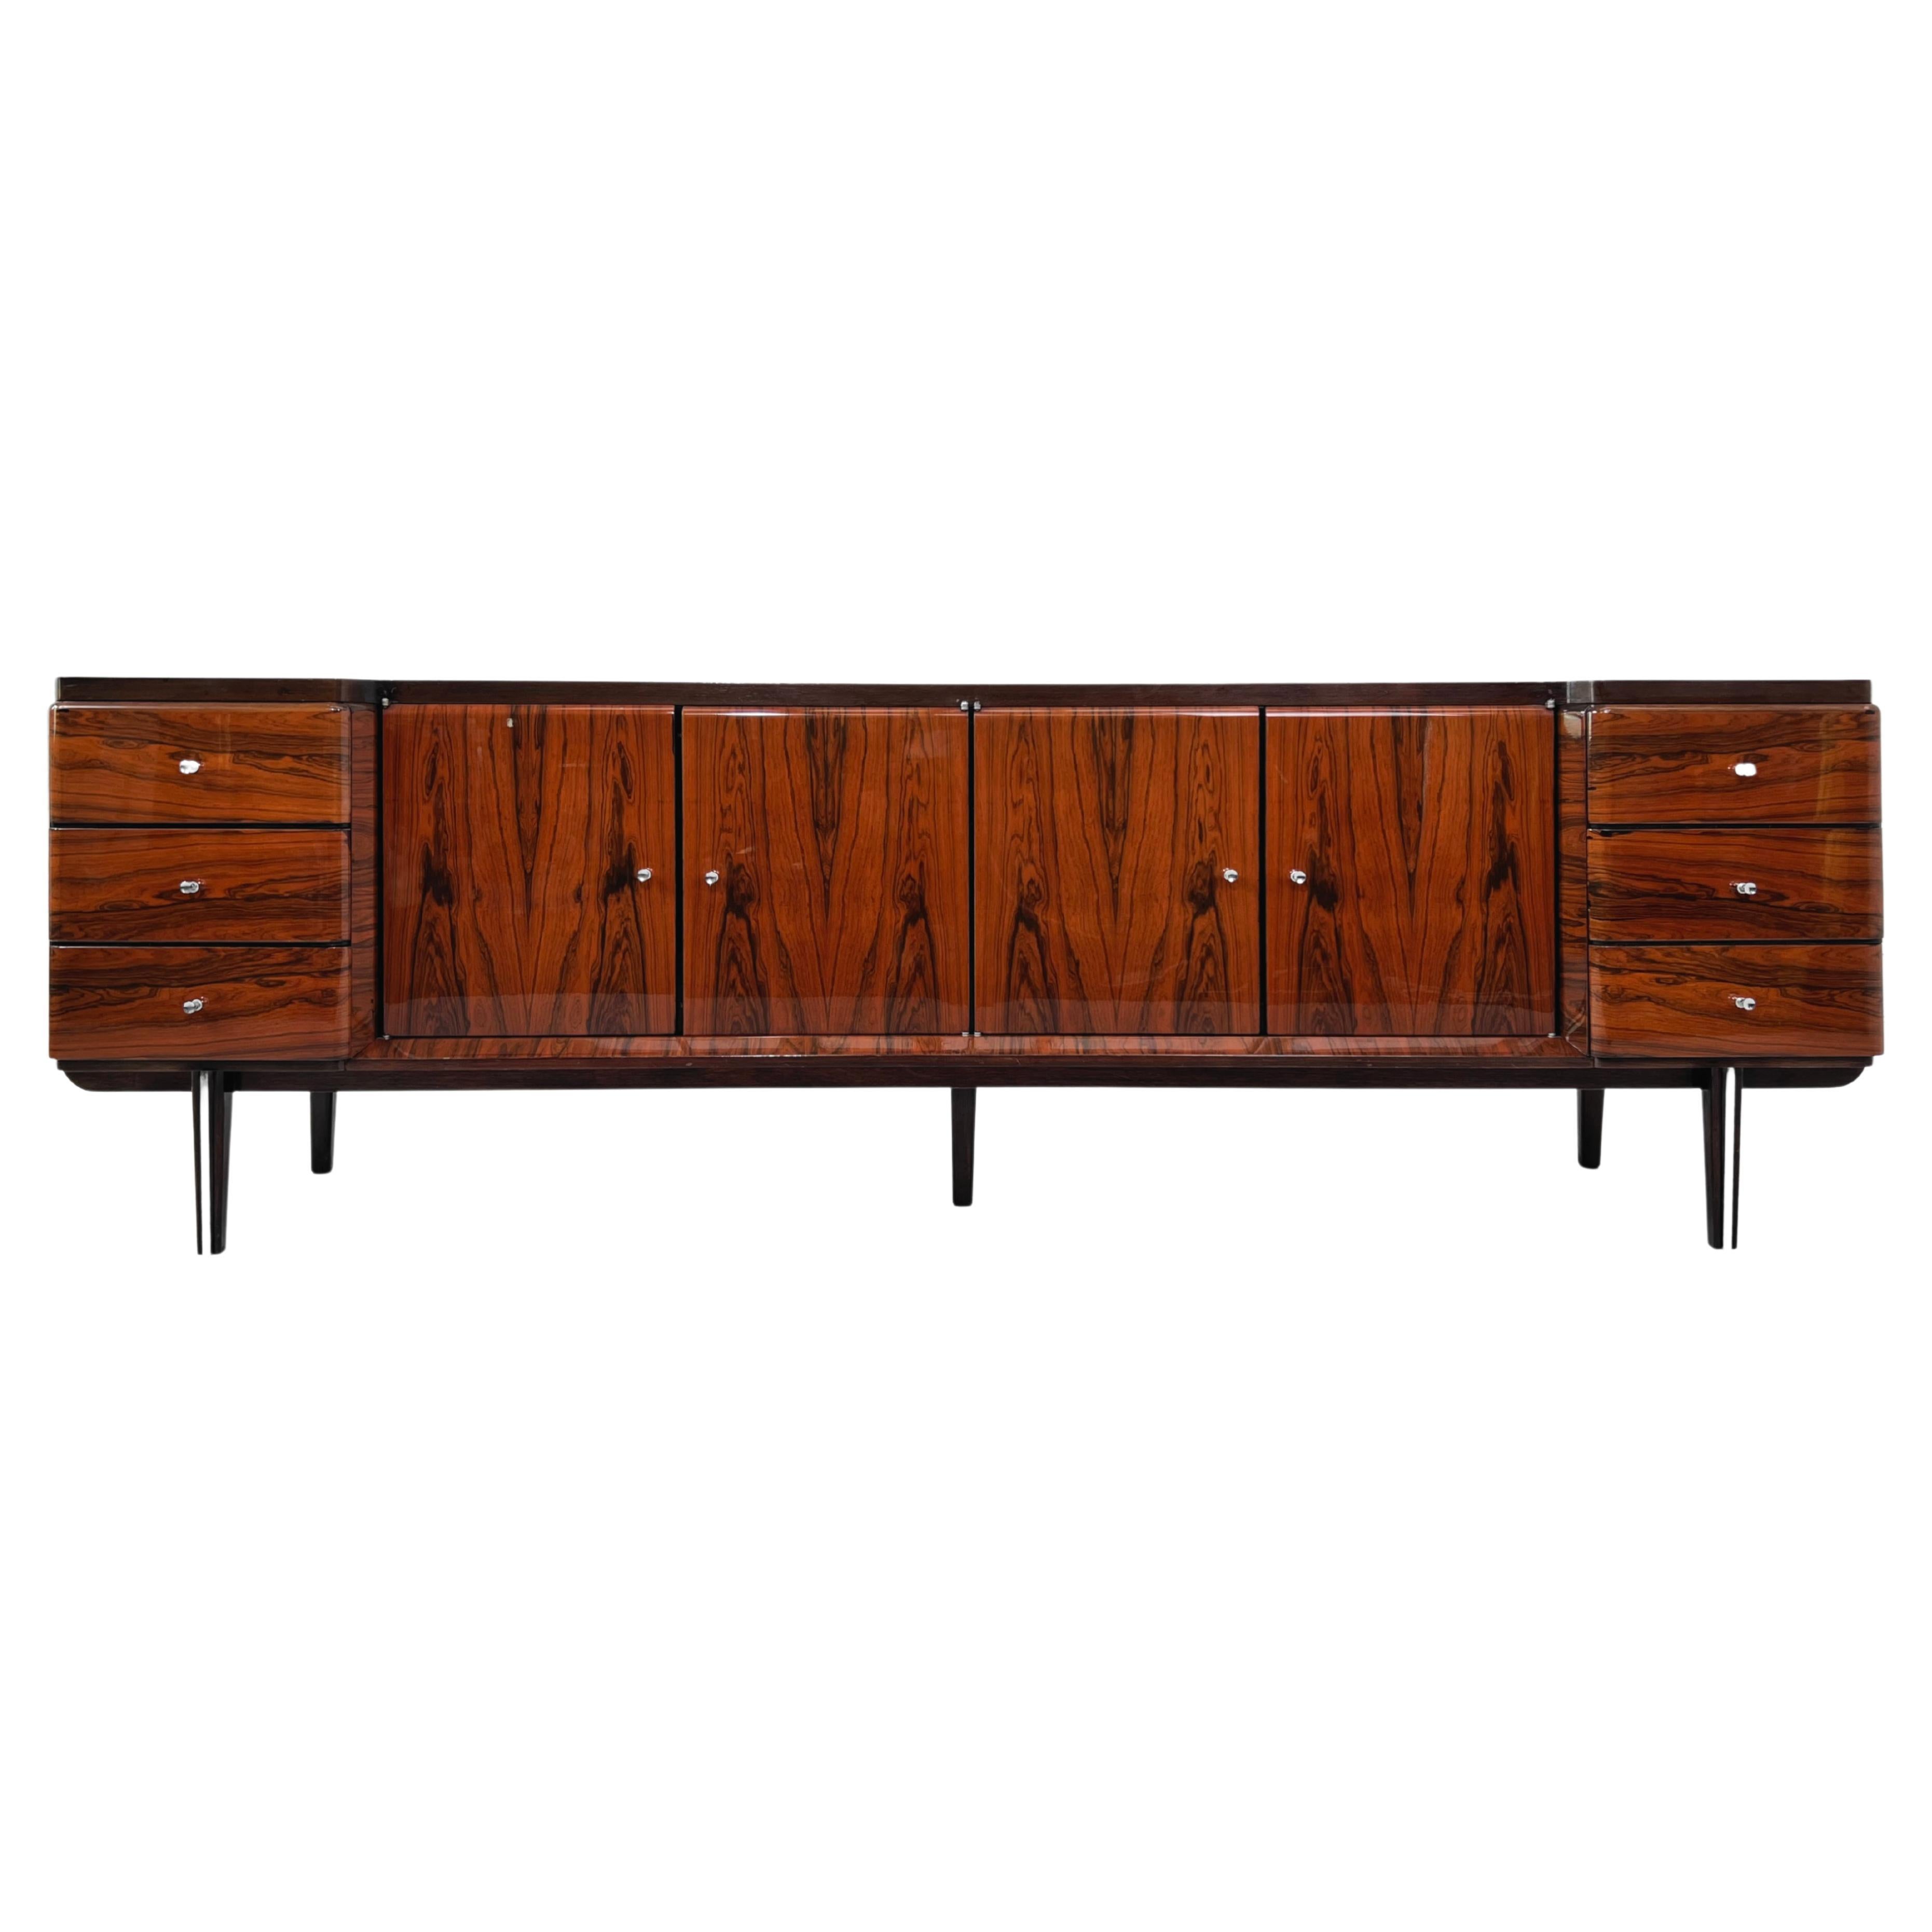 1950 -1960s Italian Design Rosewood Glossy Finishes Curved Sideboard  For Sale